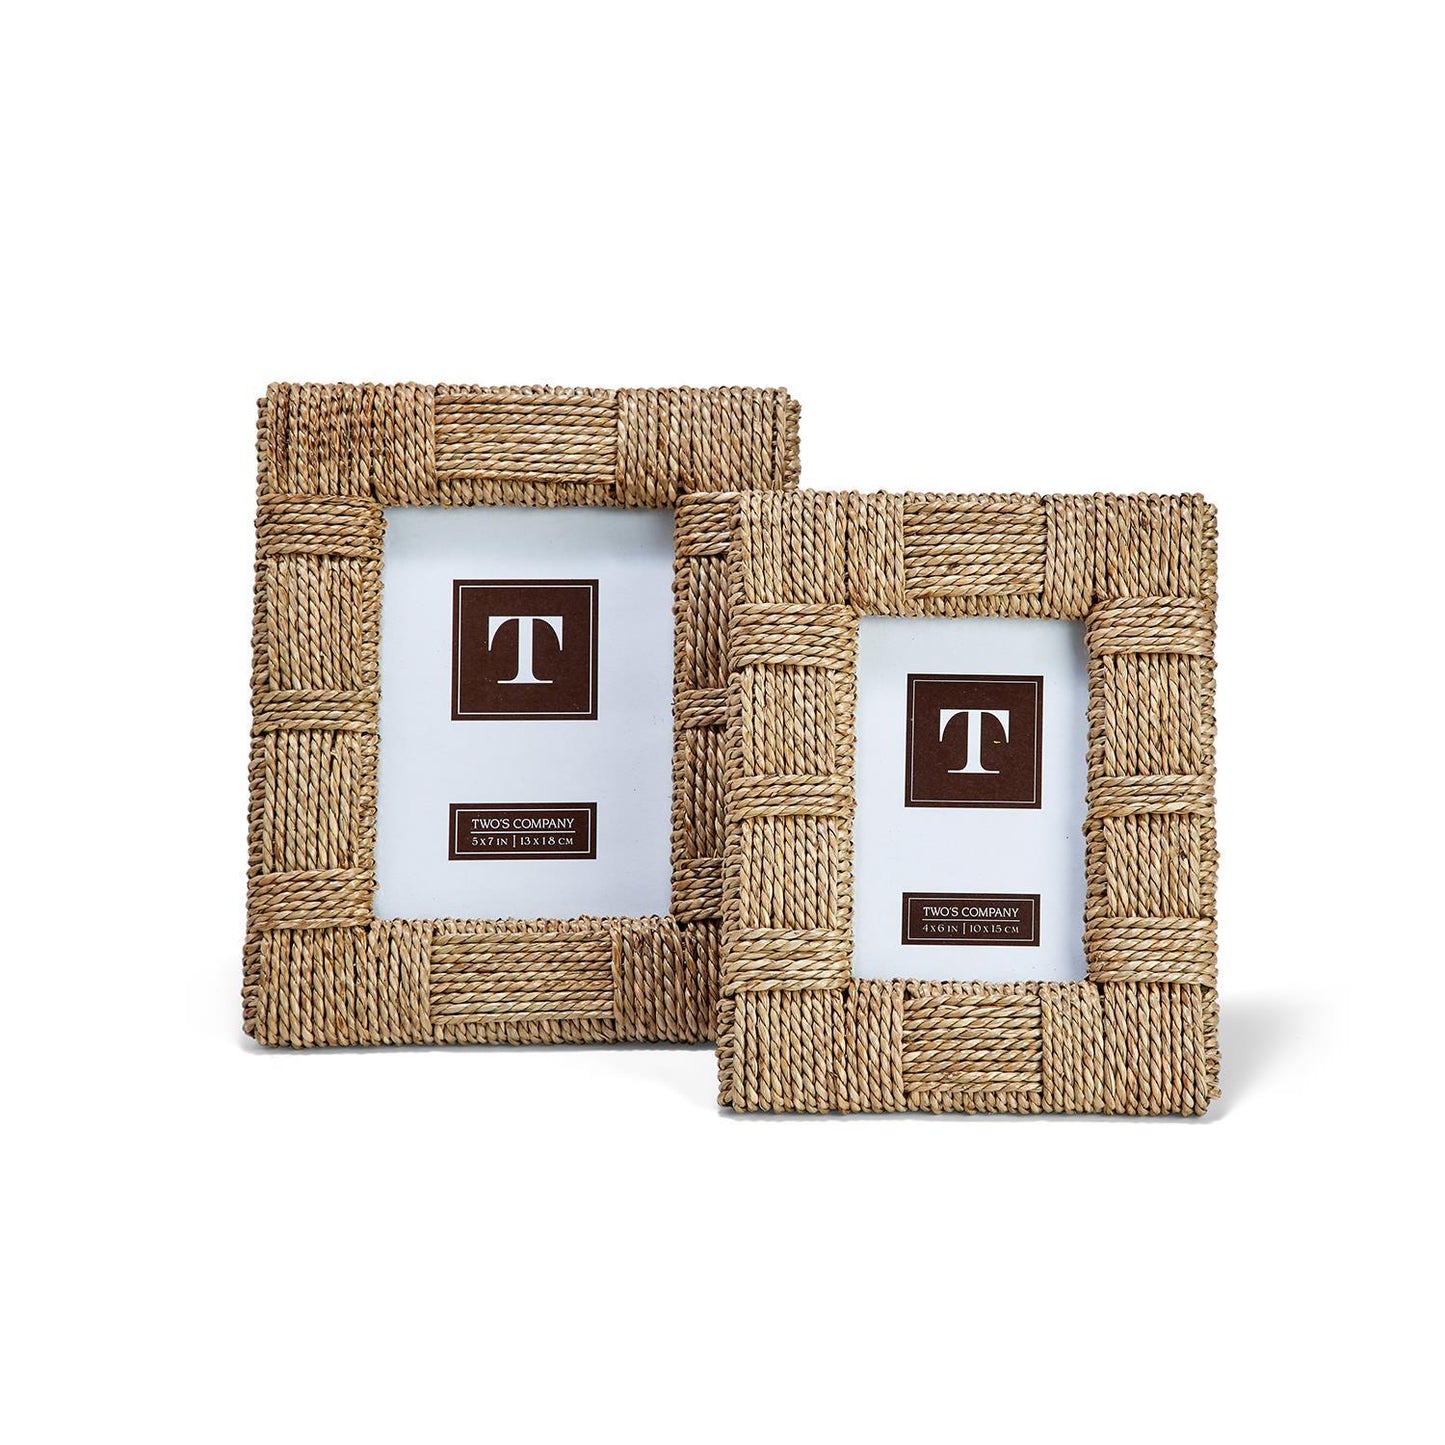 Two's Company Natural View Photo Frames, Set of 2, Sea Grass